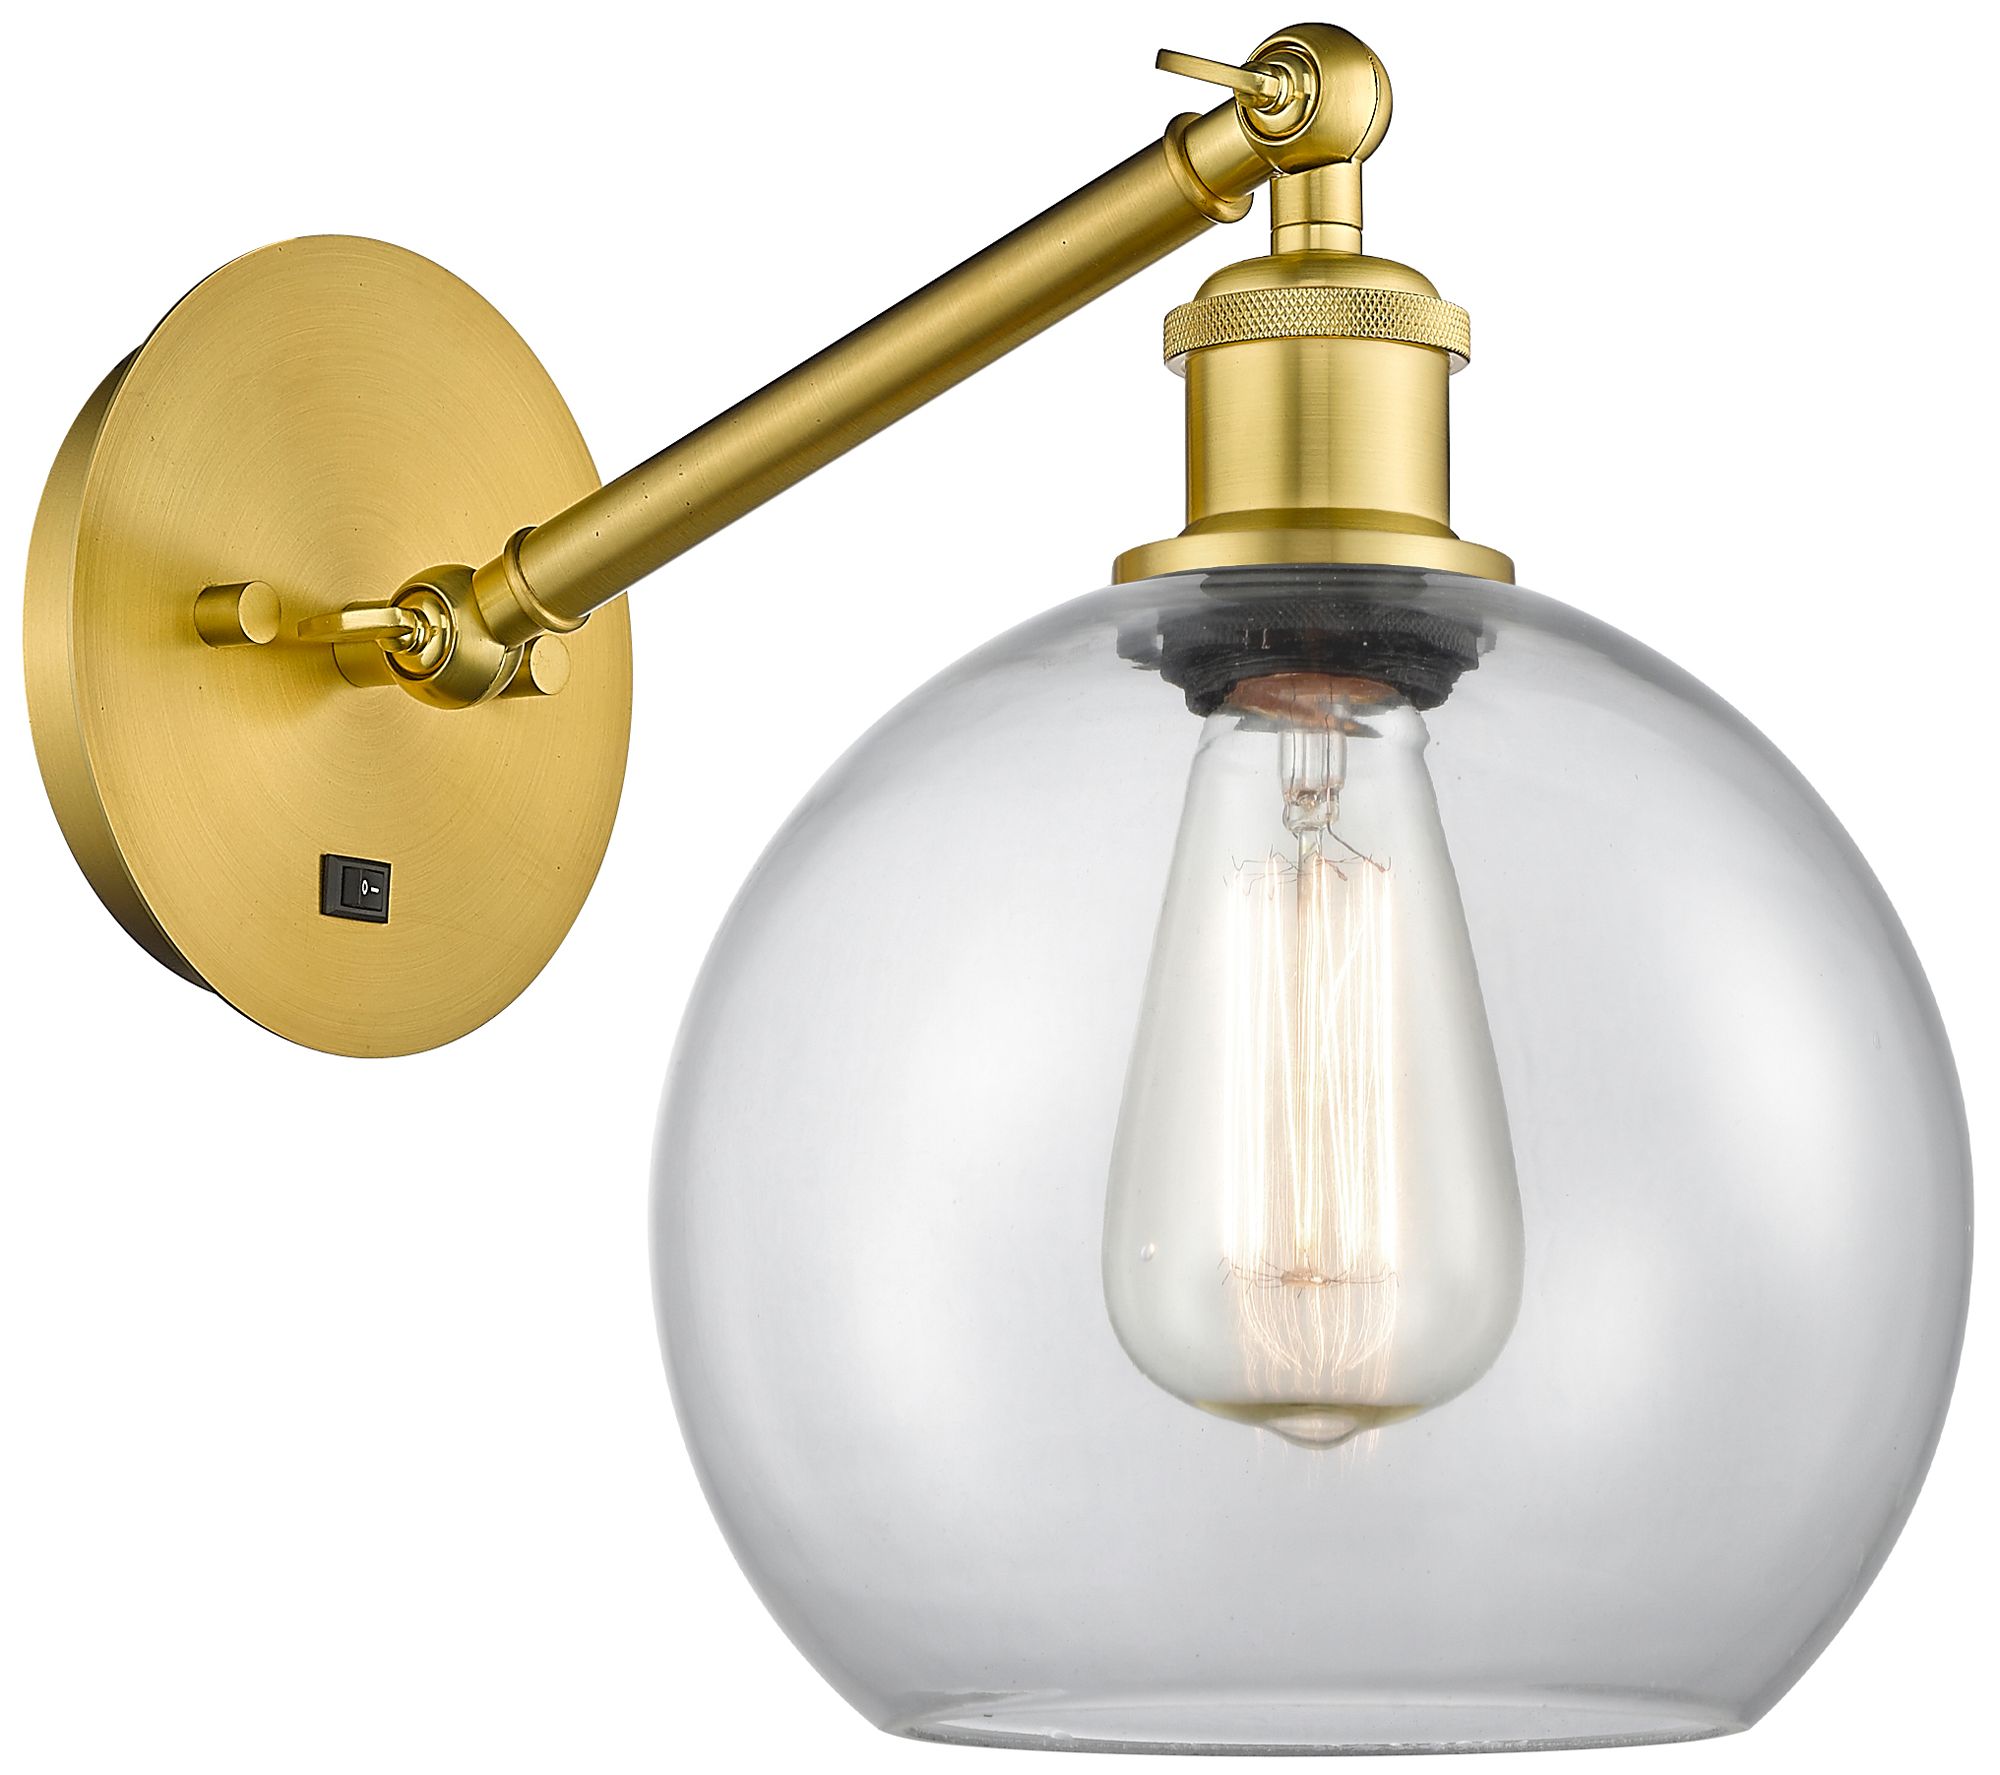 Ballston Athens 8" Incandescent Sconce - Gold Finish - Clear Shade